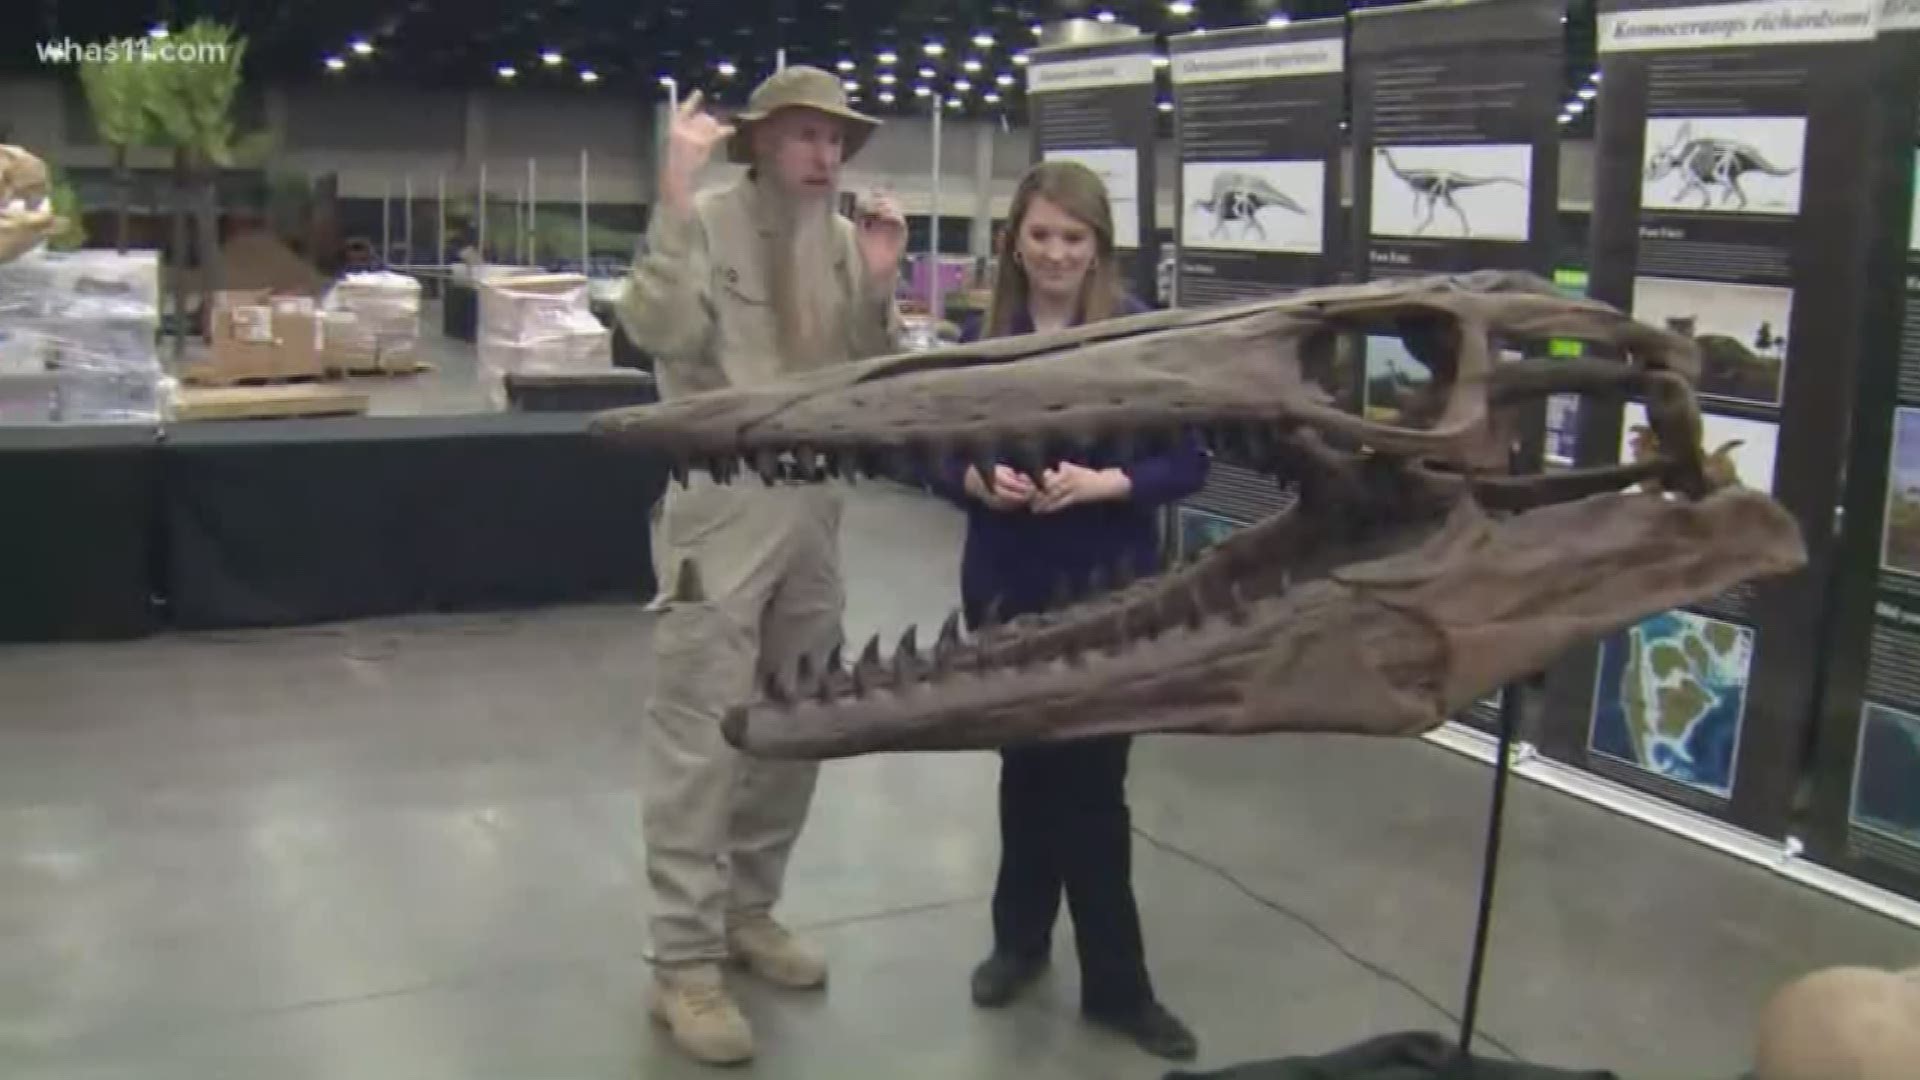 Brooke Hasch got a lesson in fossils from Park Ranger Marty at Jurassic Quest. The event is open all weekend at the Kentucky Expo Center.